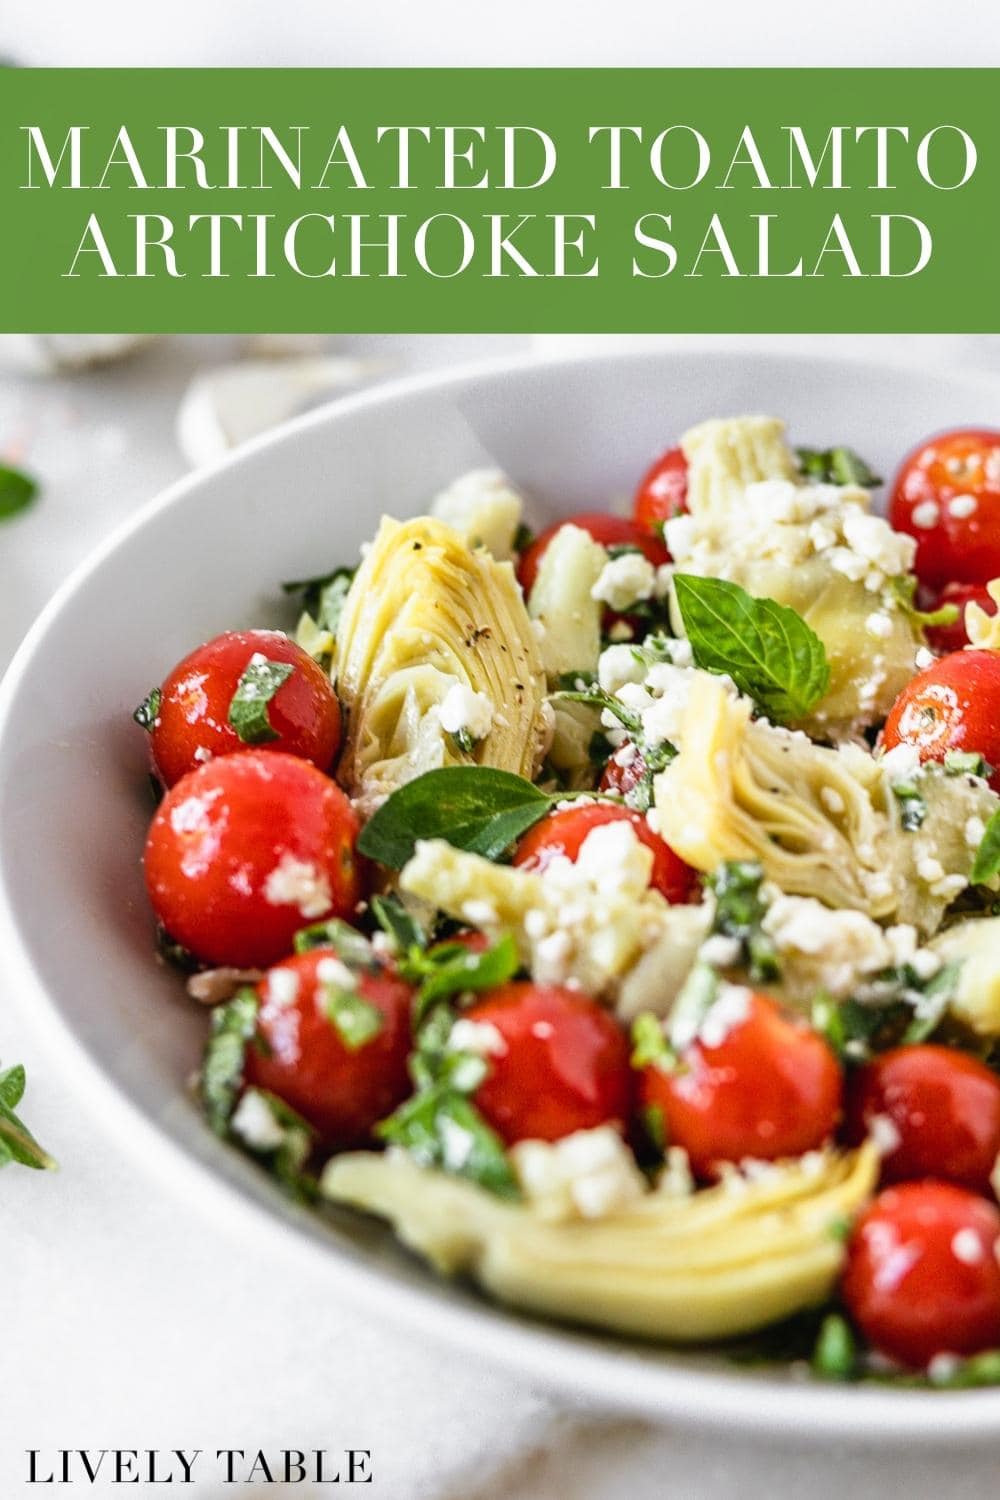 Marinated Artichoke Salad with Tomatoes and Feta - Lively Table